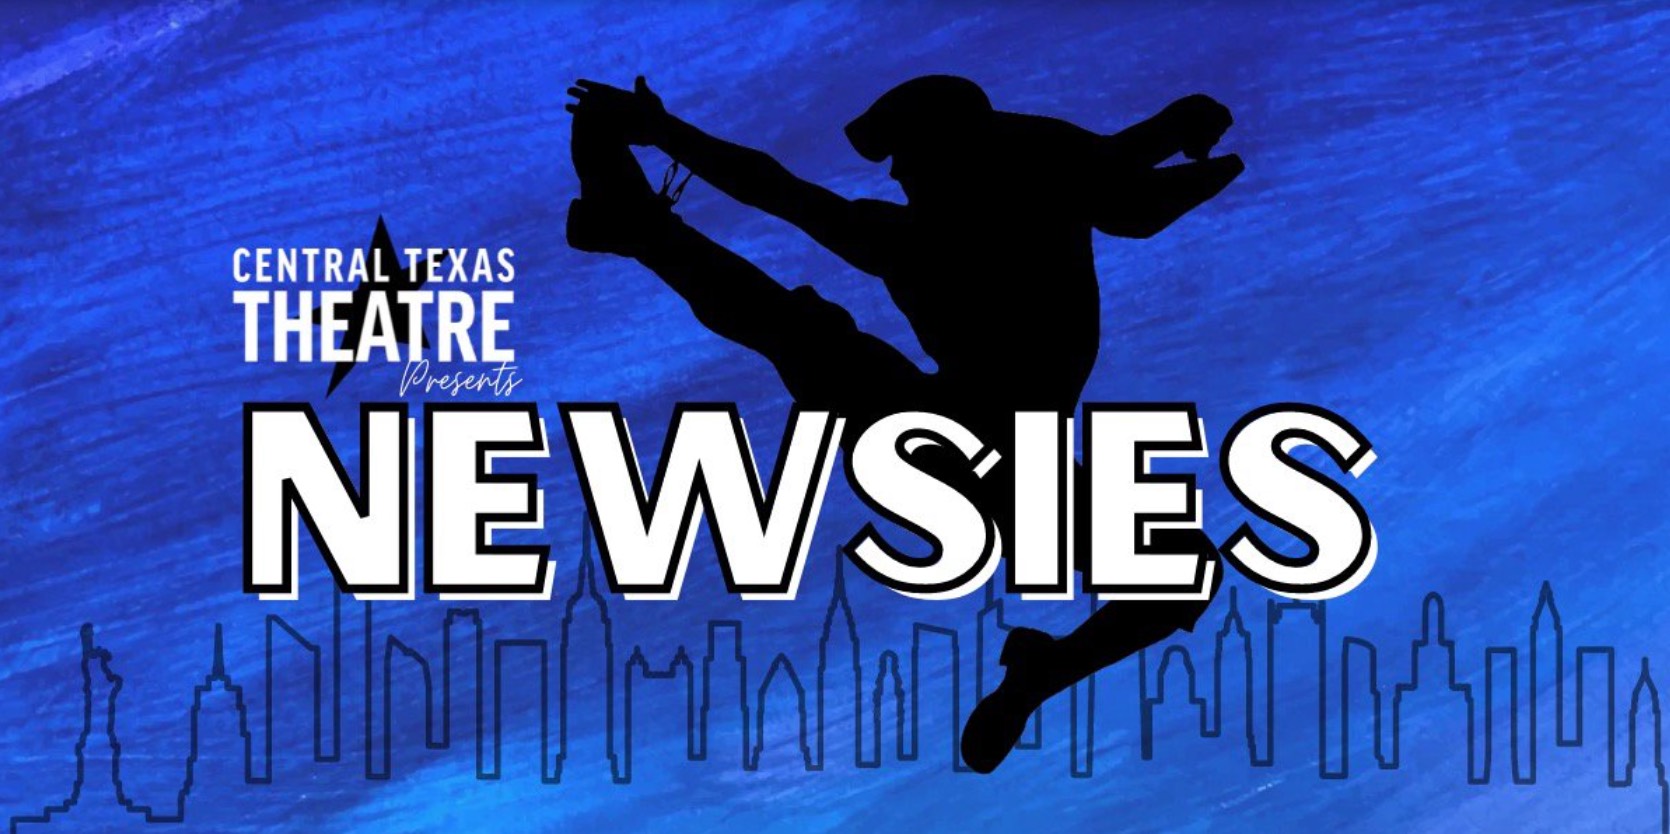 Disney's Newsies by Central Texas Theatre (formerly Vive les Arts)